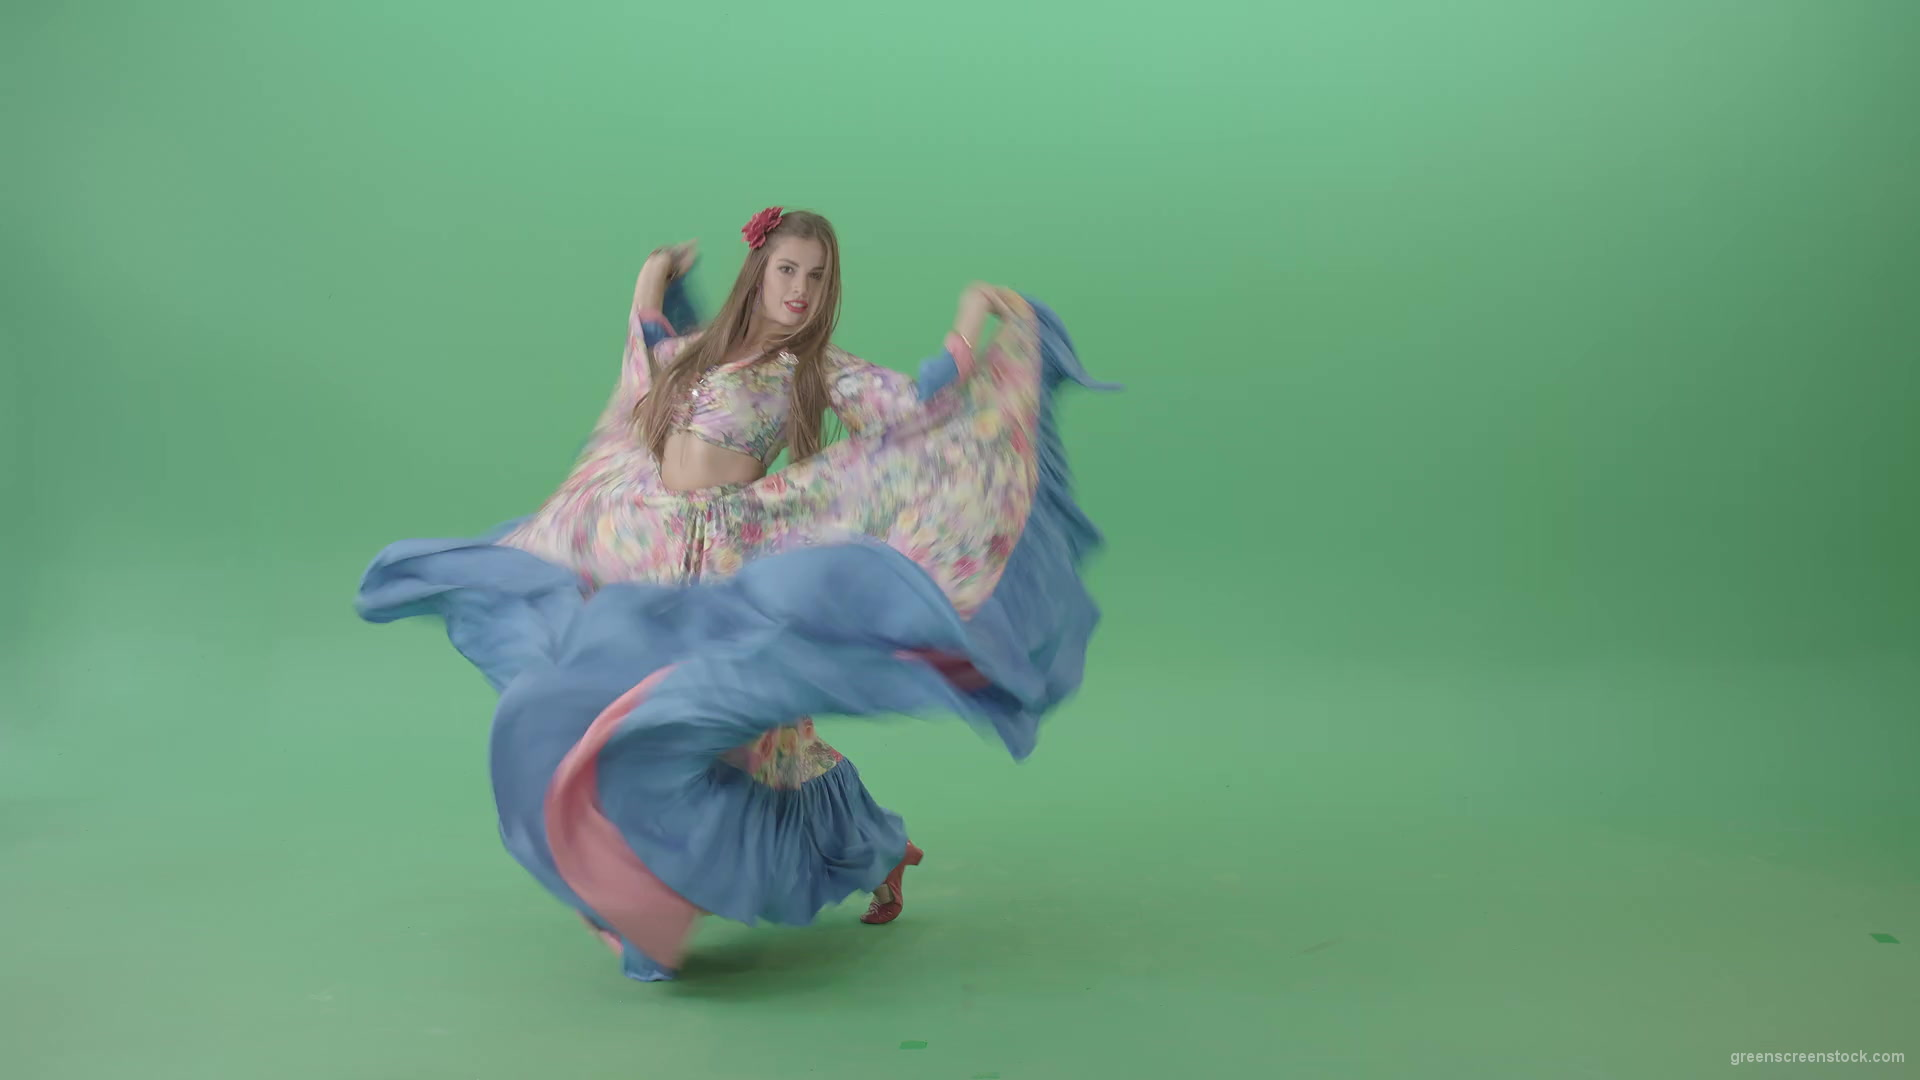 Balkan-roma-girl-waving-gypsy-dress-and-dancing-isolated-on-green-screen-4K-Video-Footage-1-1920_009 Green Screen Stock